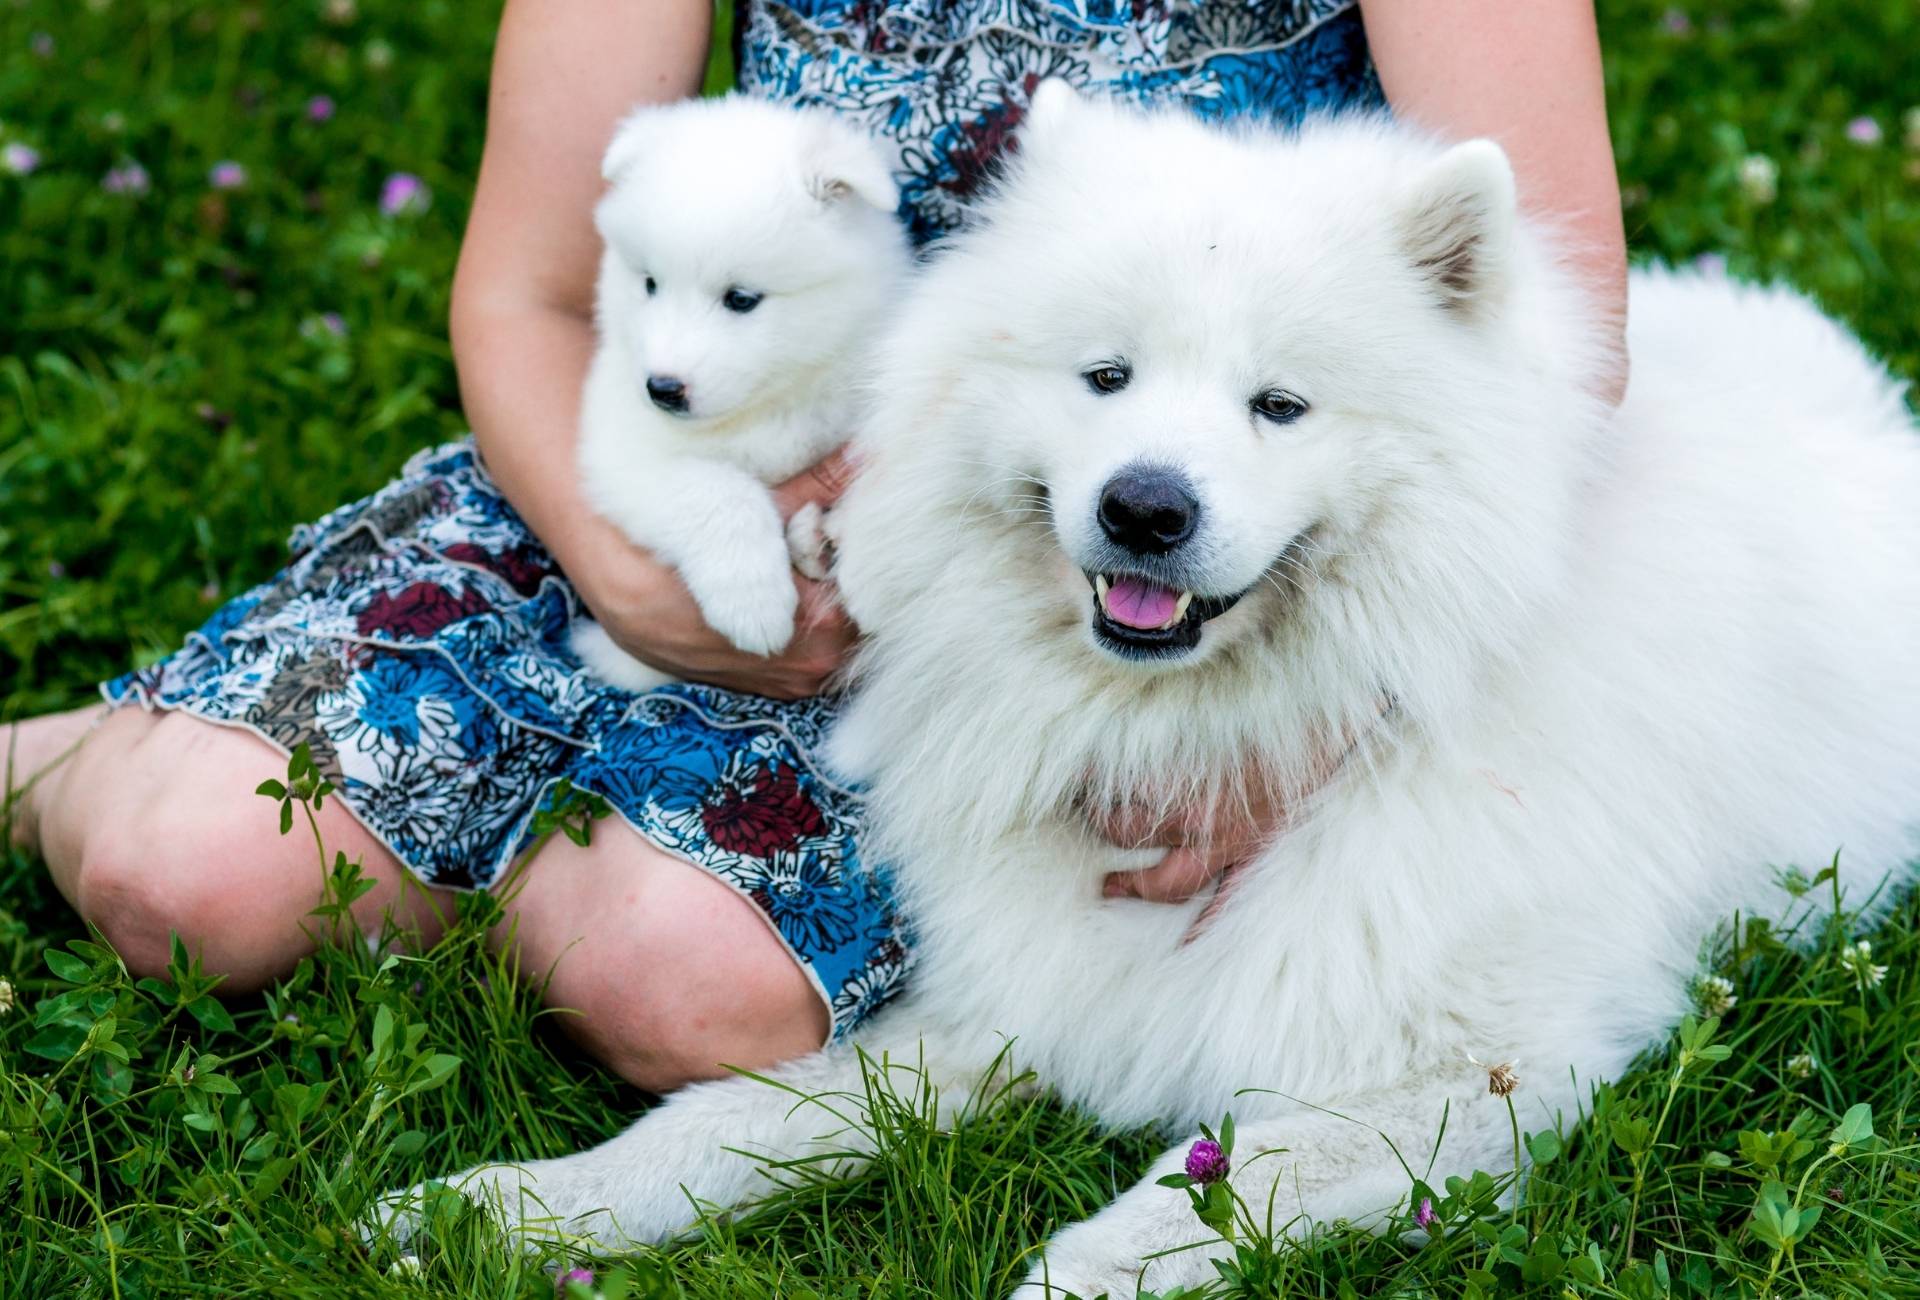 A person holds a white puppy while petting an older dog.